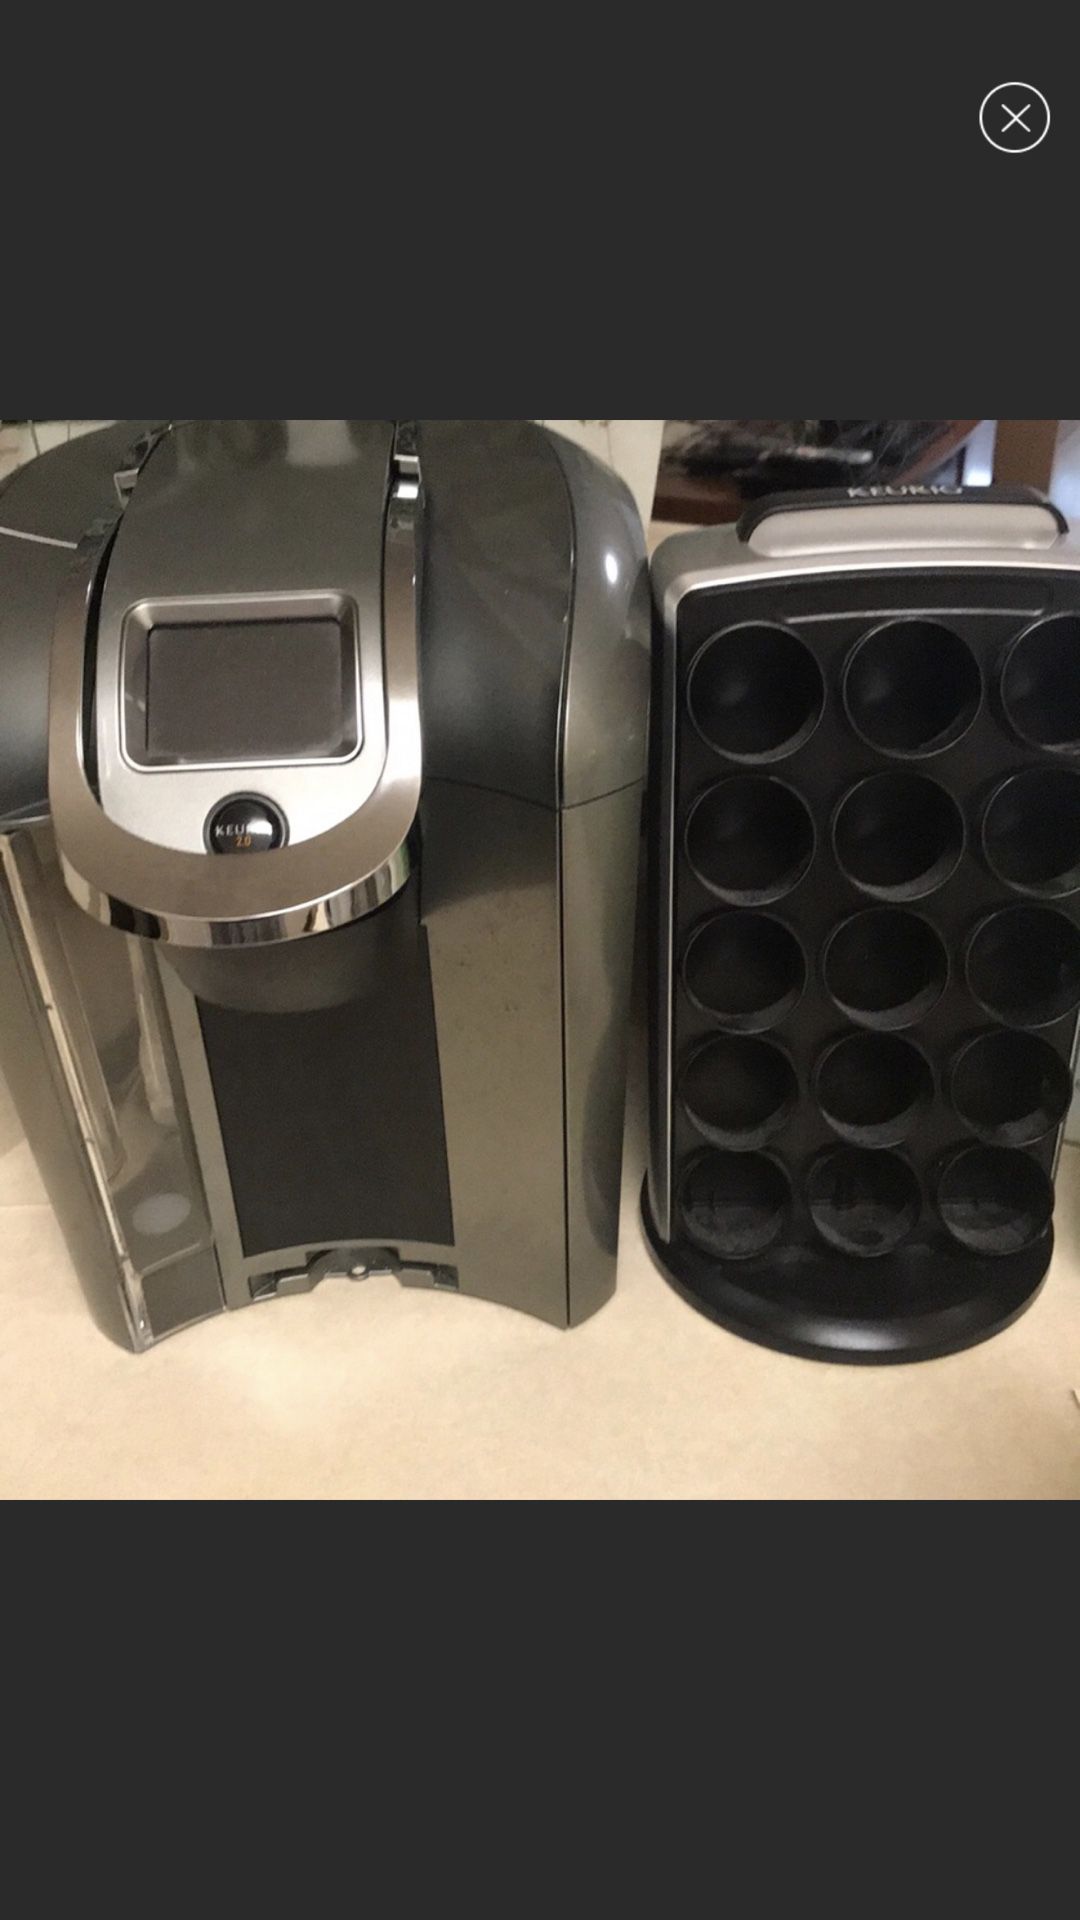 Keurig 2.0 and k cup 30 count holder